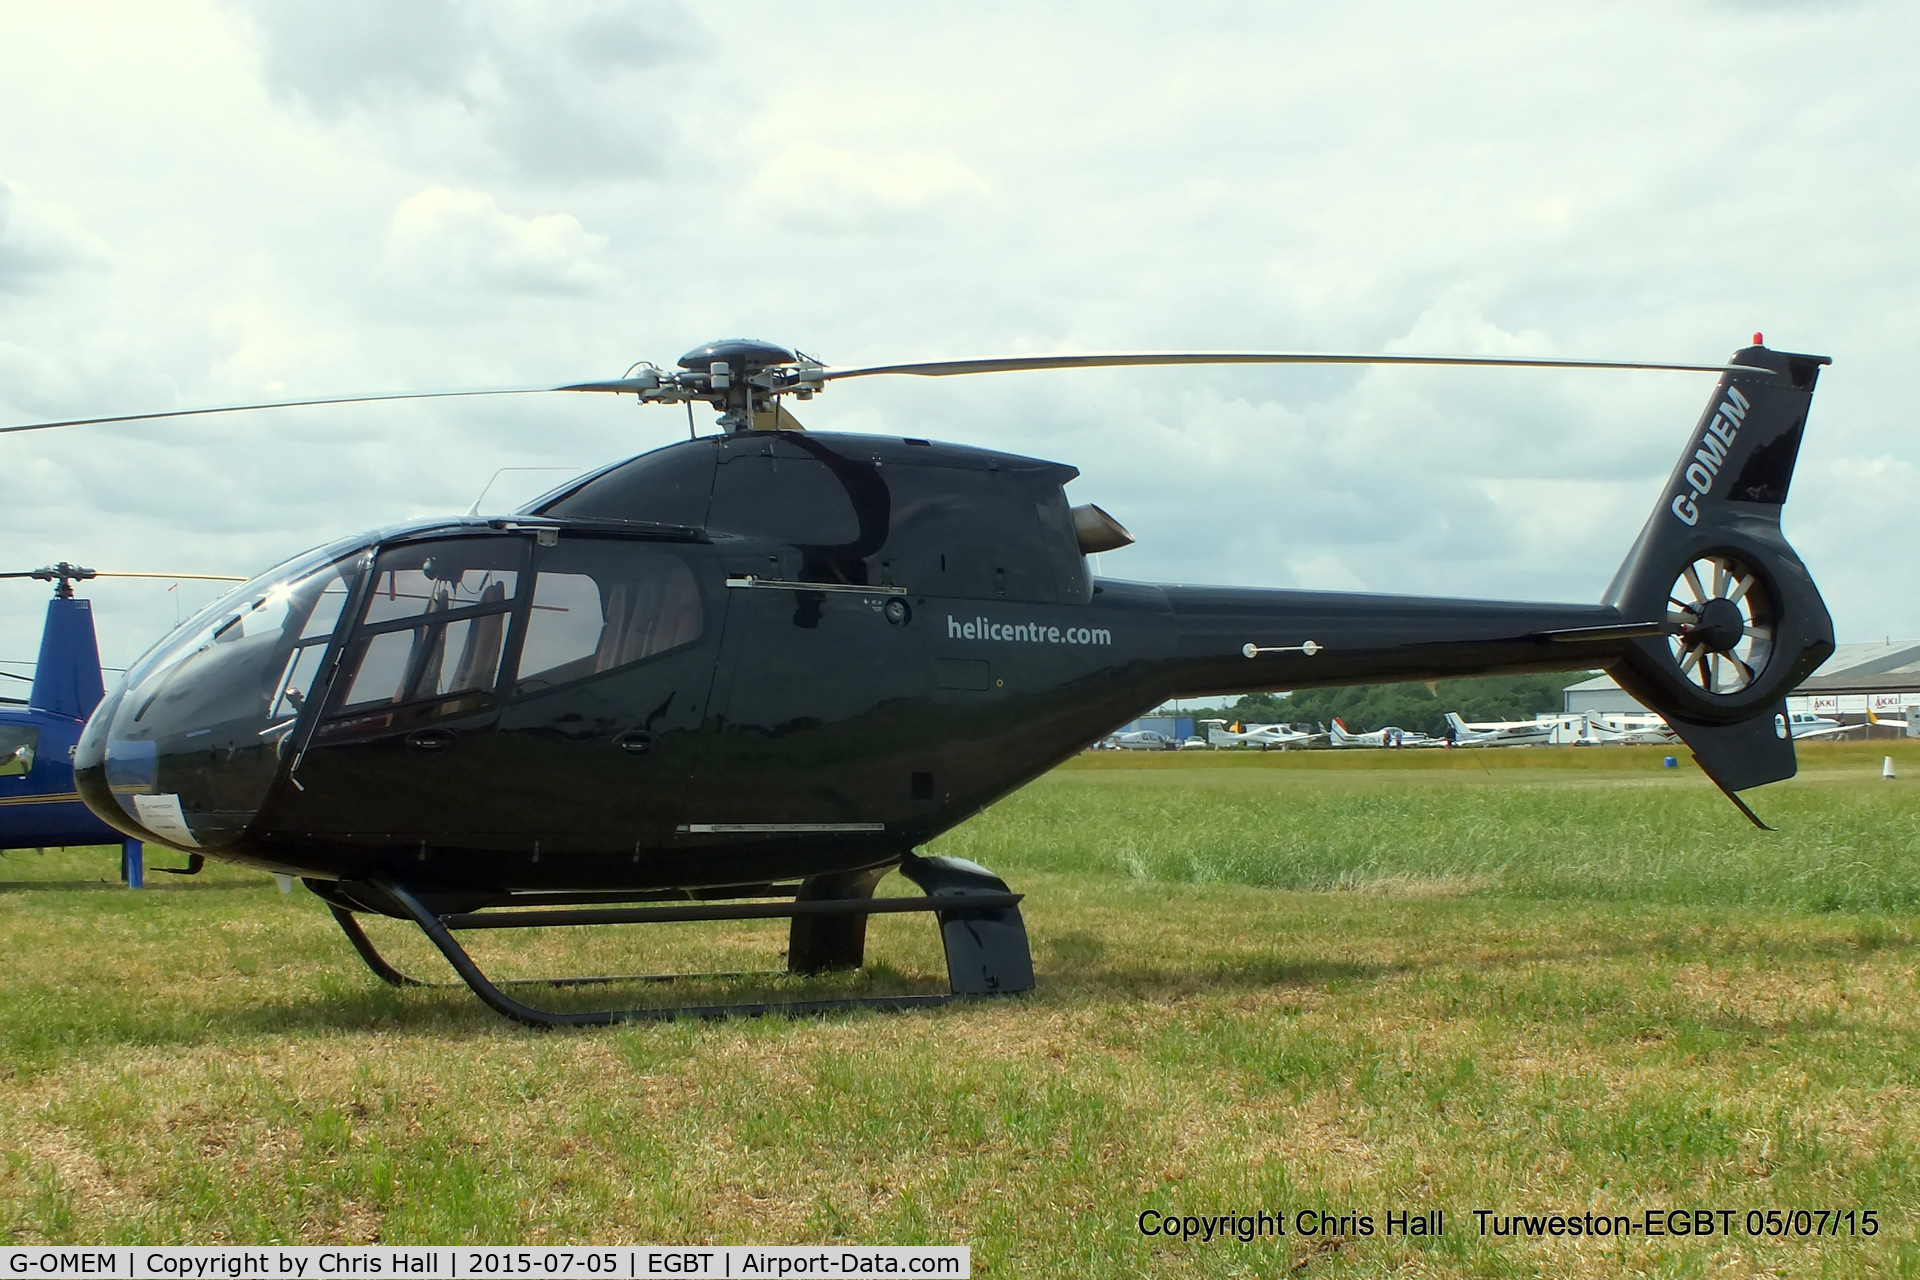 G-OMEM, 1998 Eurocopter EC-120B Colibri C/N 1006, ferrying race fans to the British F1 Grand Prix at Silverstone